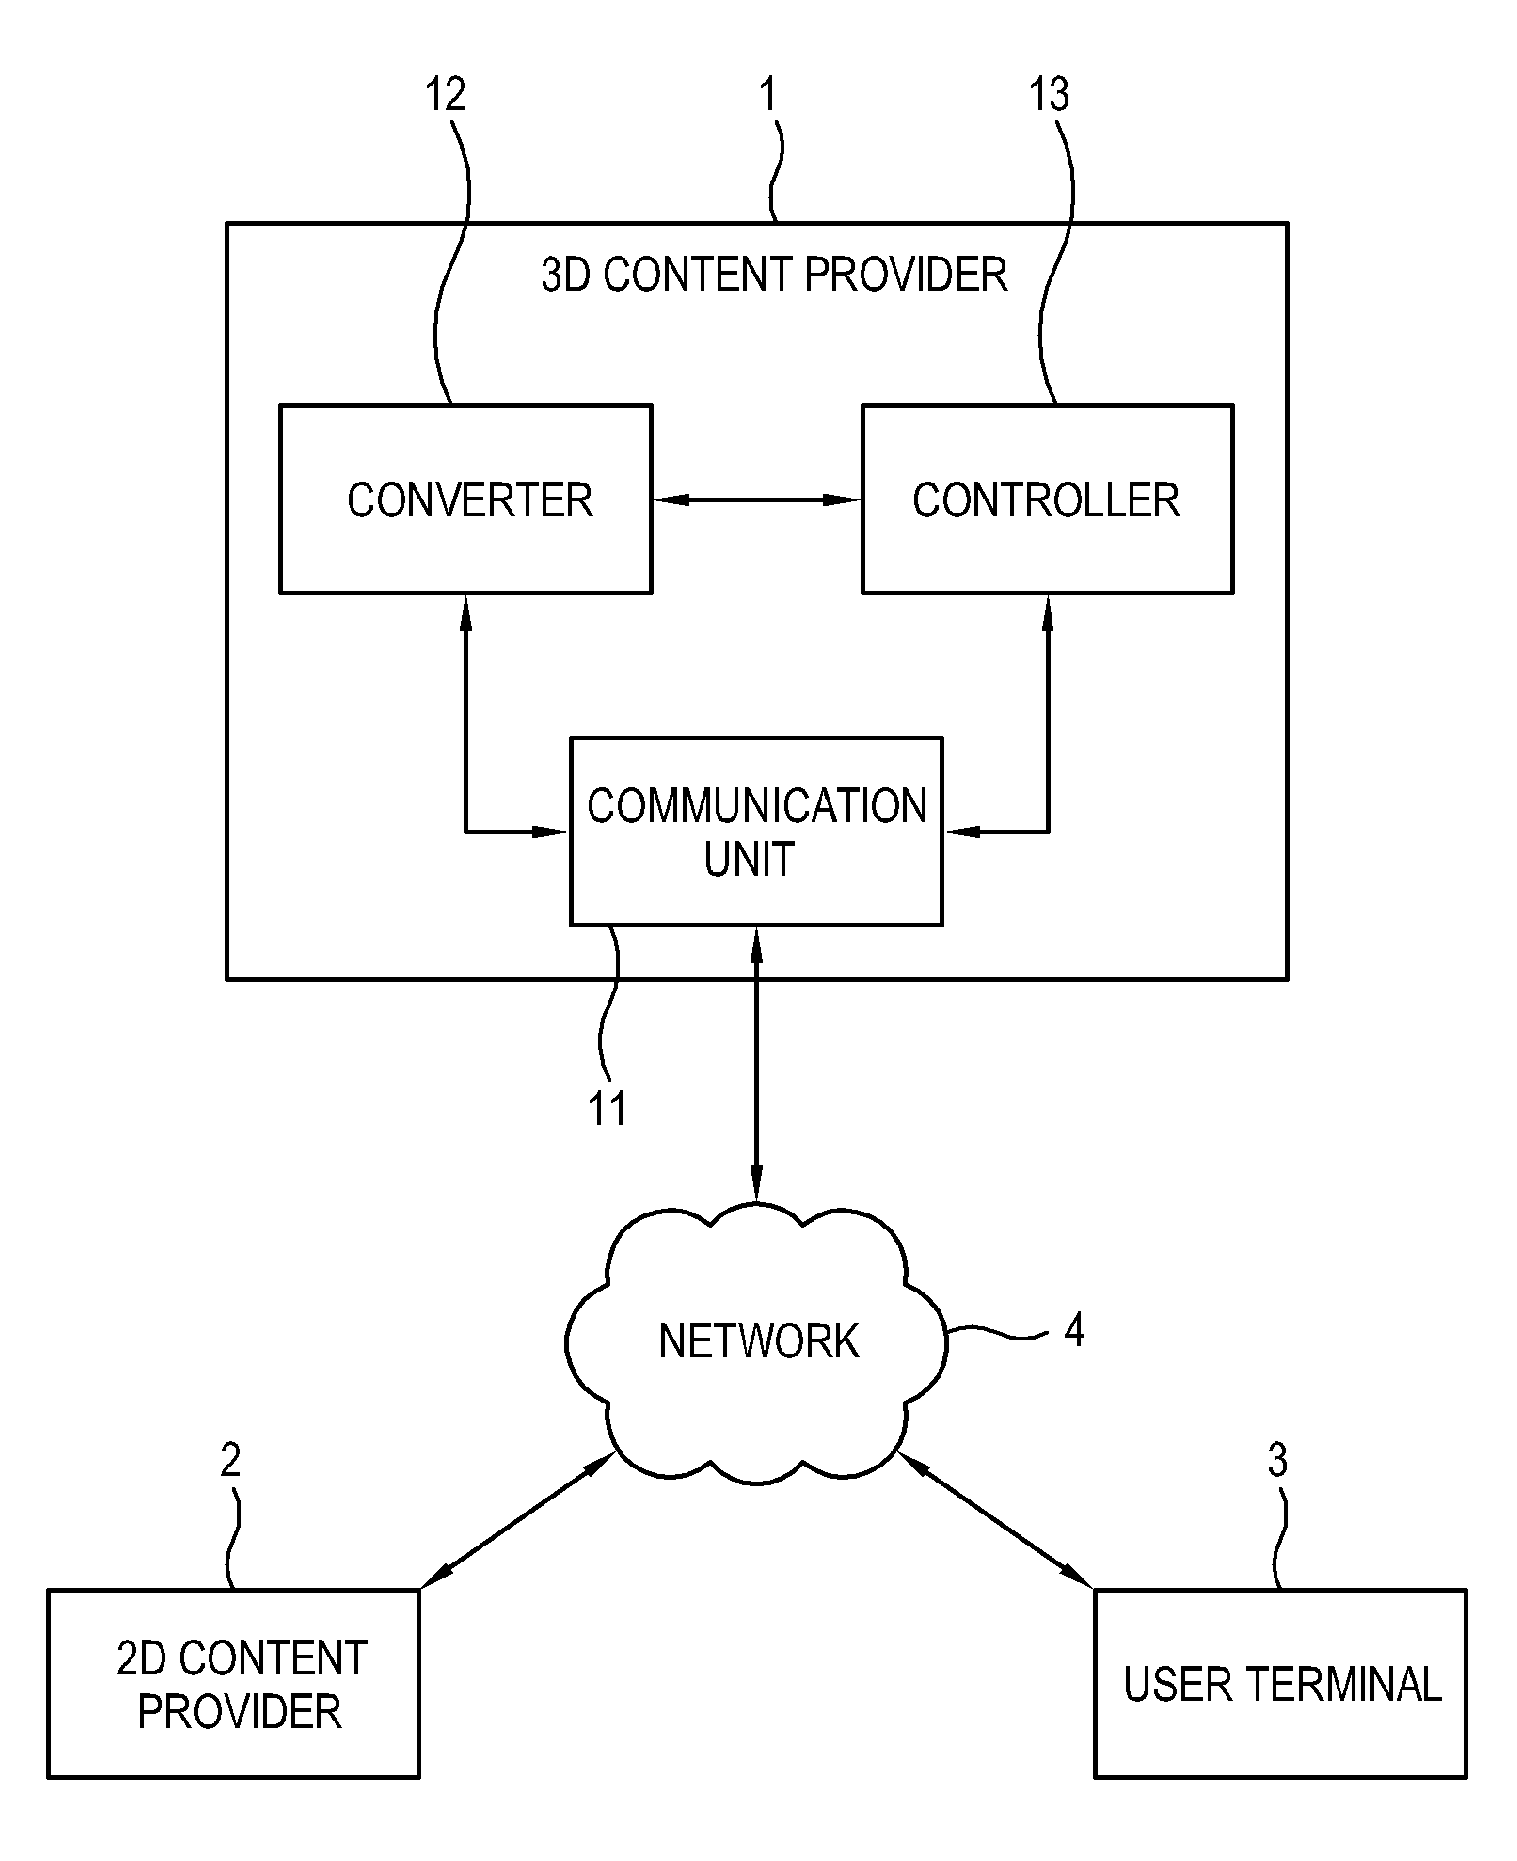 Apparatus and method for providing 3D content